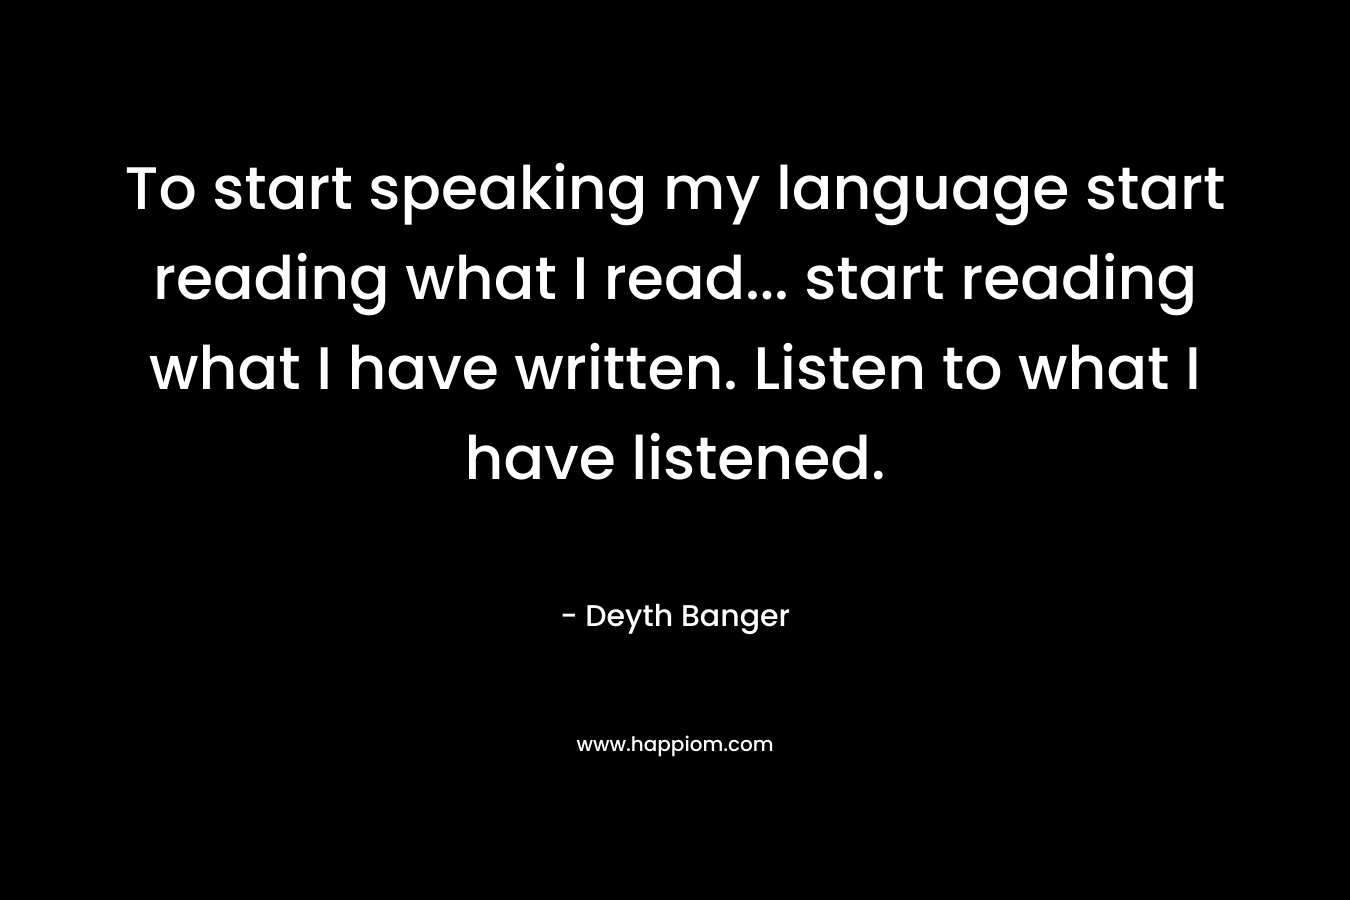 To start speaking my language start reading what I read... start reading what I have written. Listen to what I have listened.